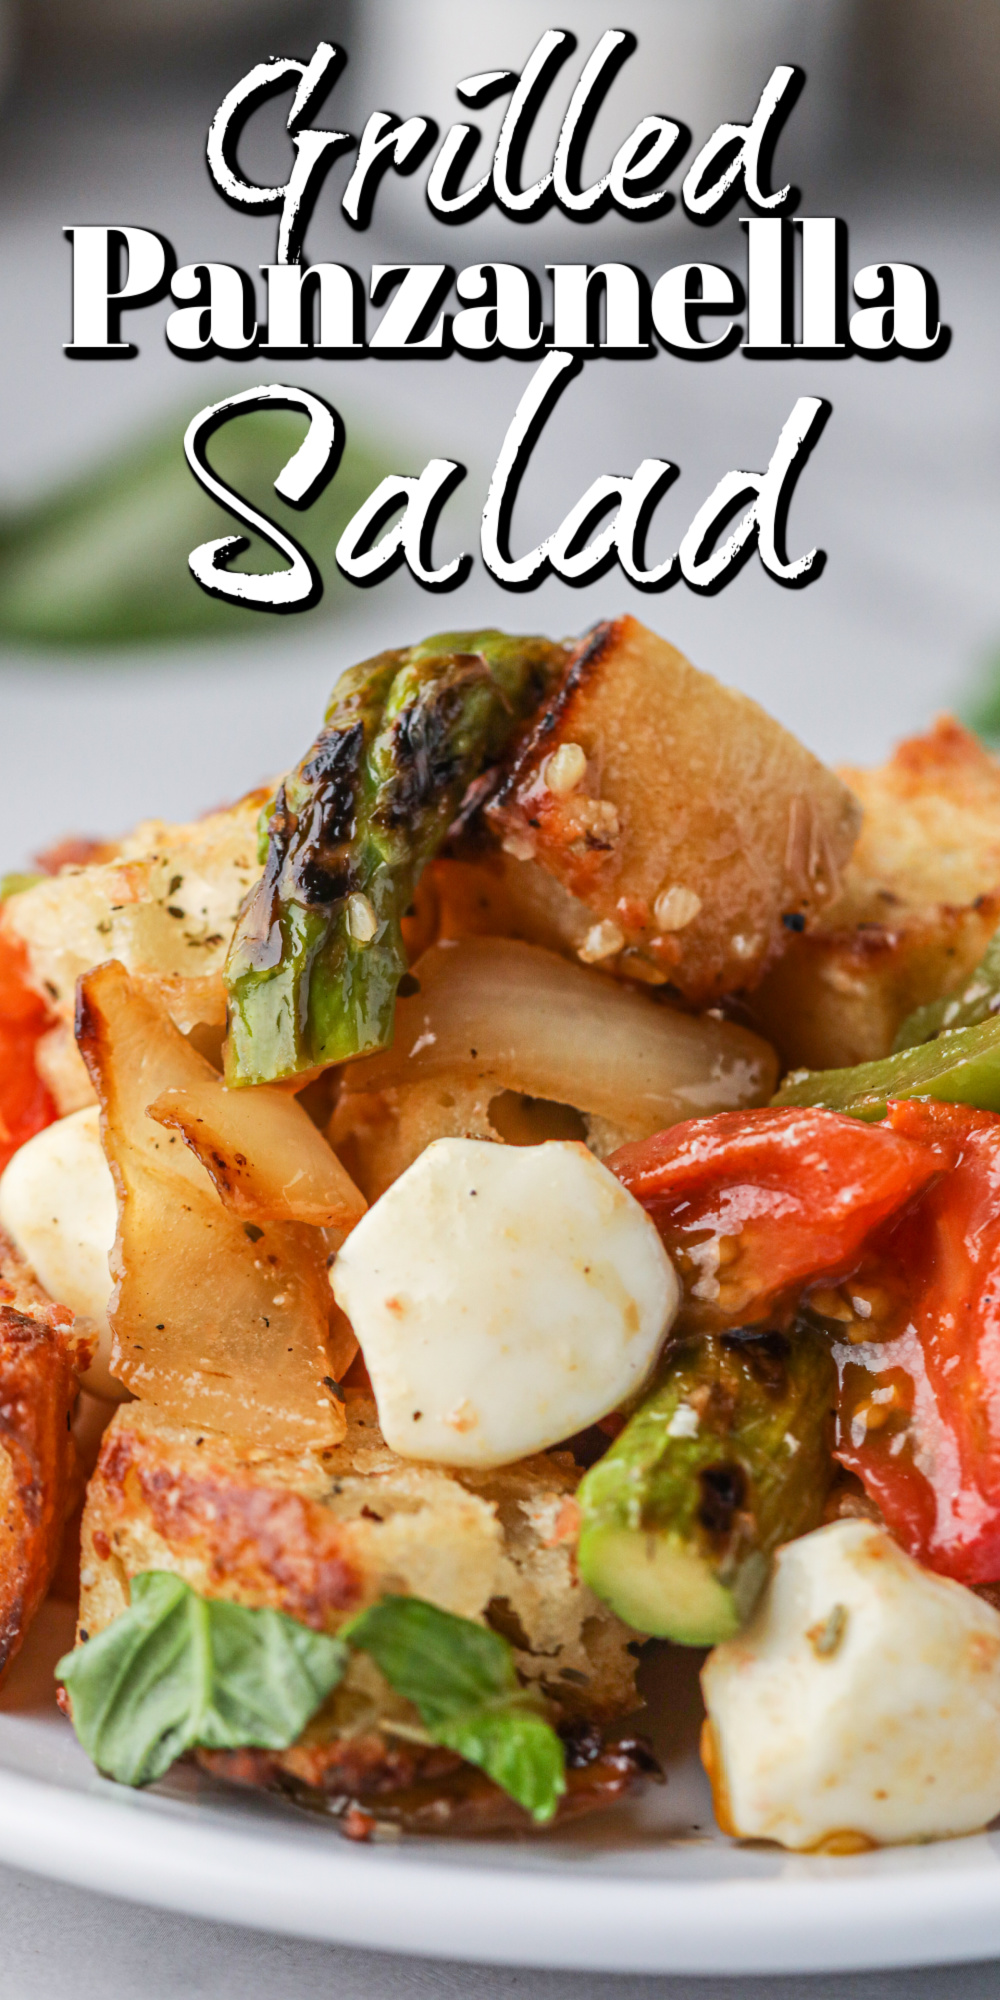 This fantastic grilled panzanella salad is quick and easy to prepare but is loaded with great flavor!